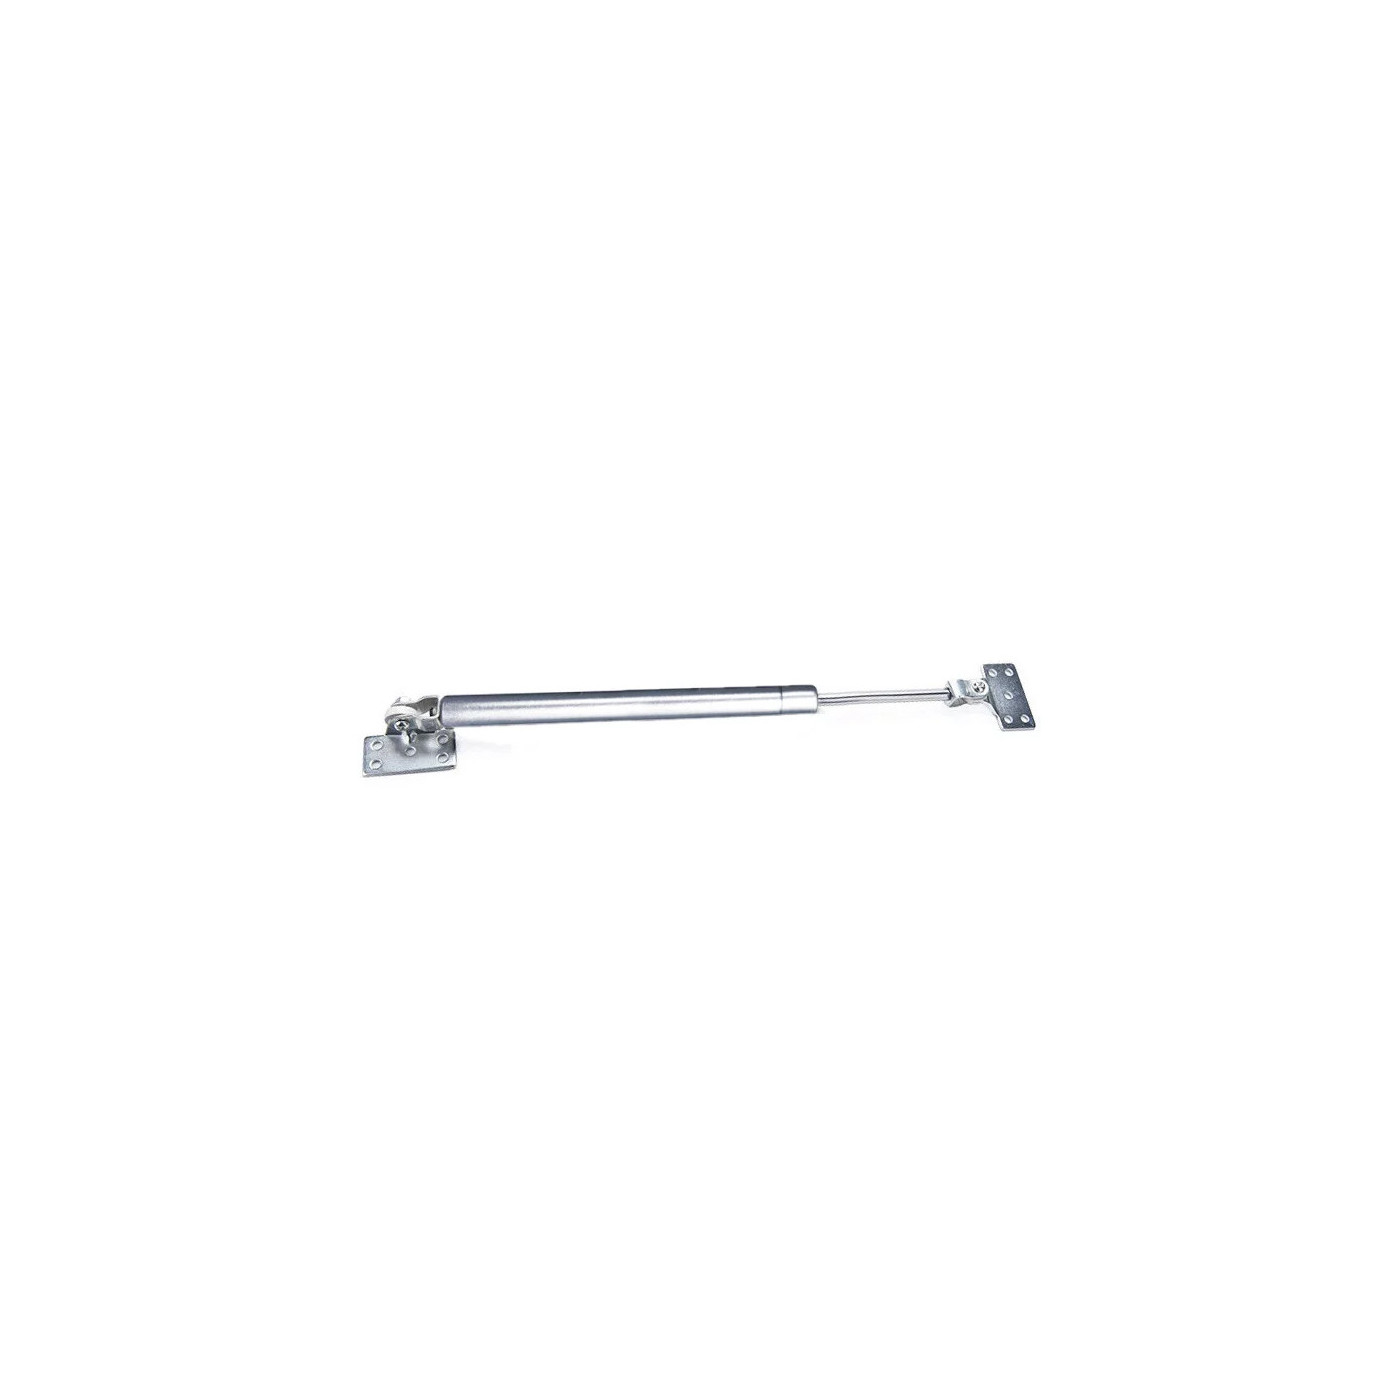 Universal gas spring with brackets (700N/70kg, 490 mm, silver)